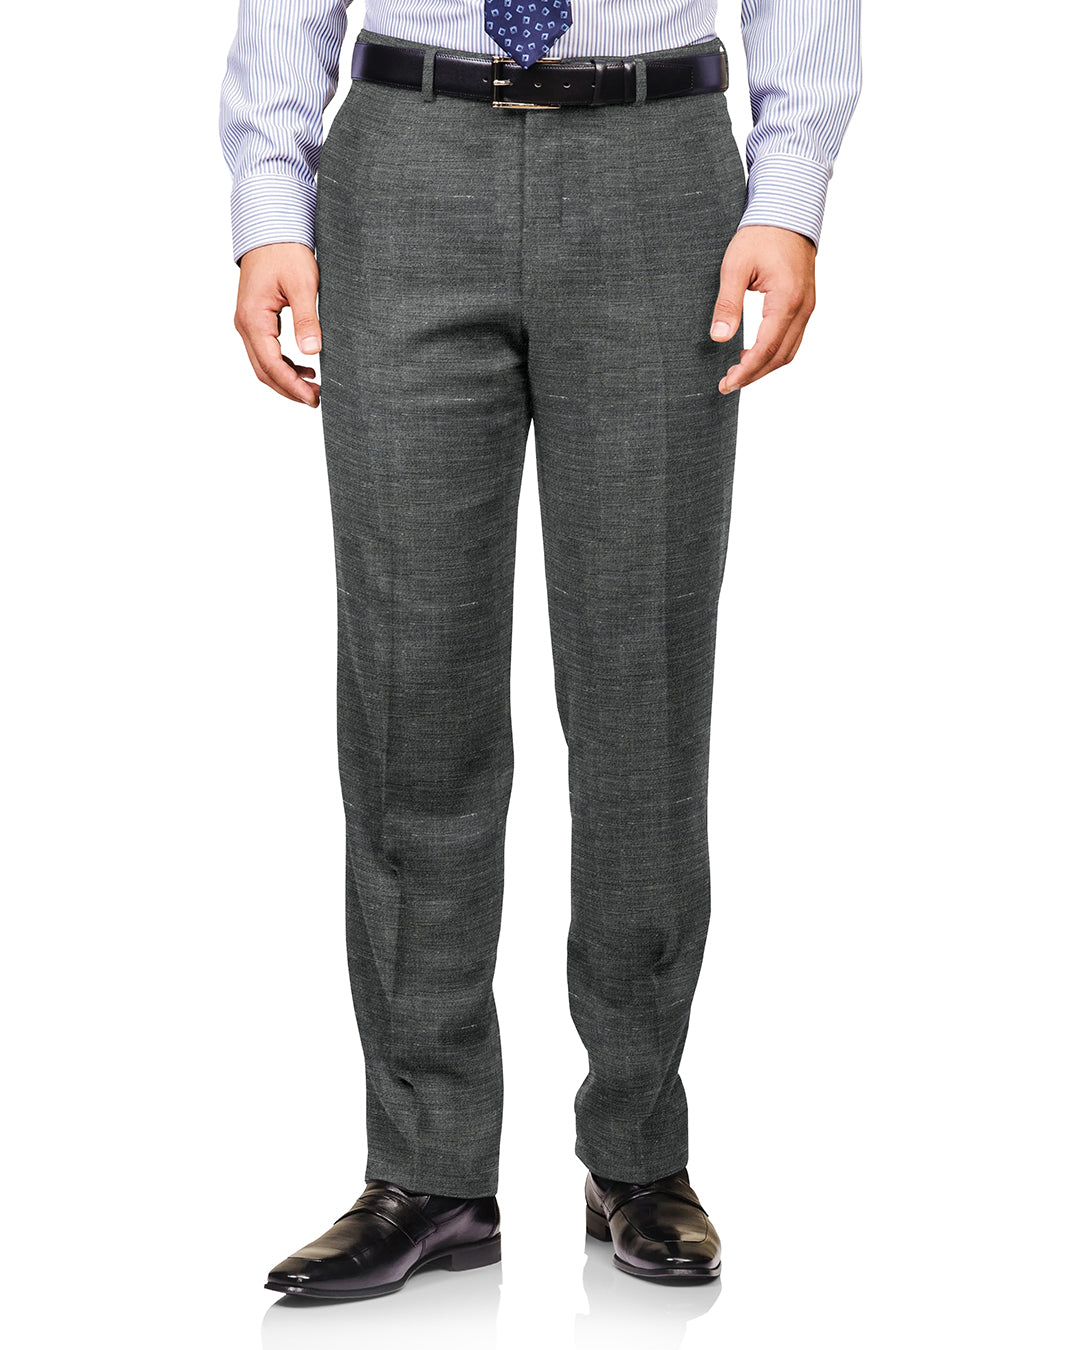 Front view of custom linen pants for men by Luxire in ash grey